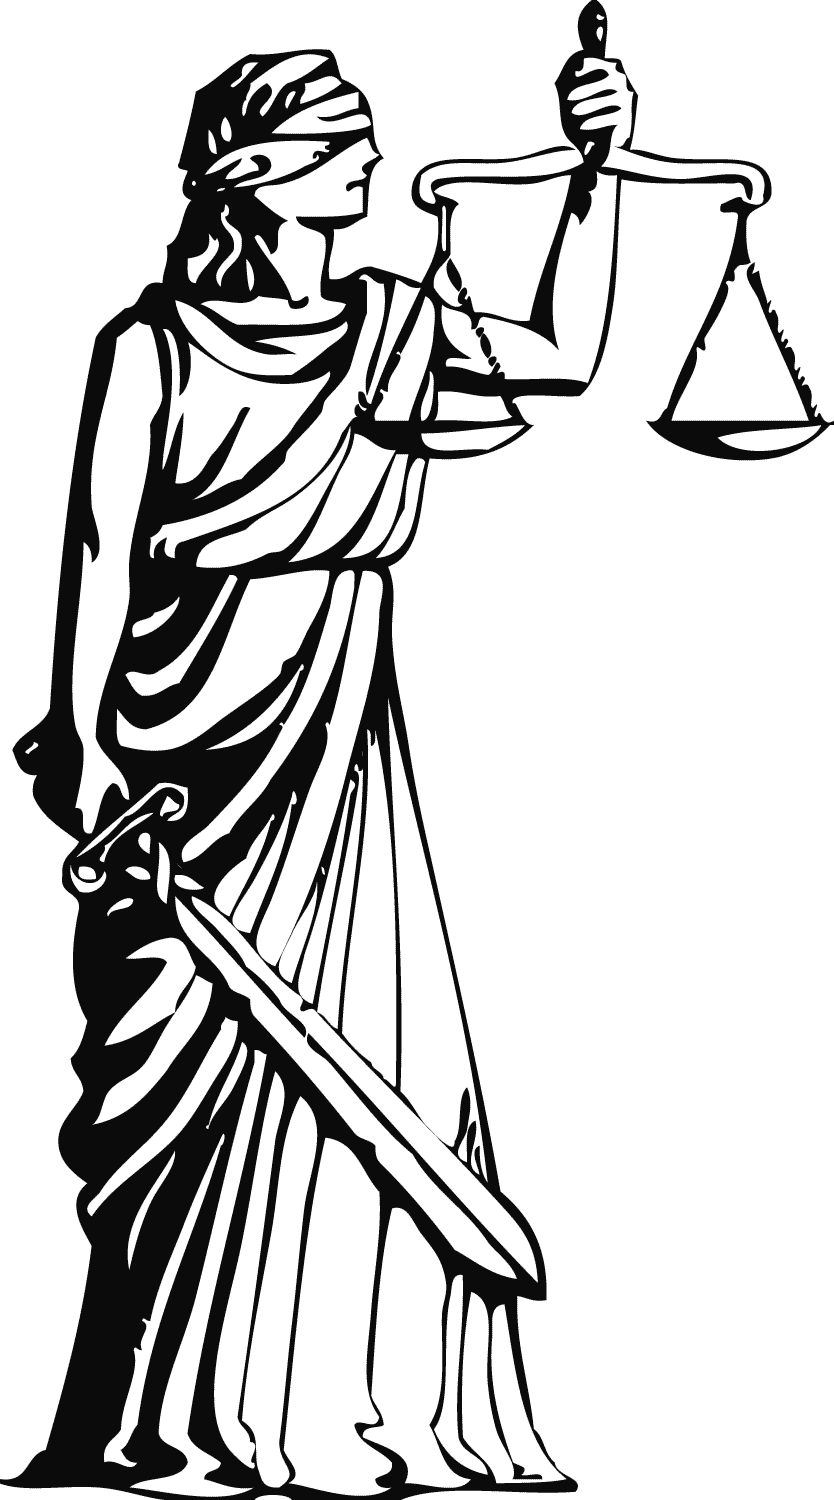 Blind justice clipart.